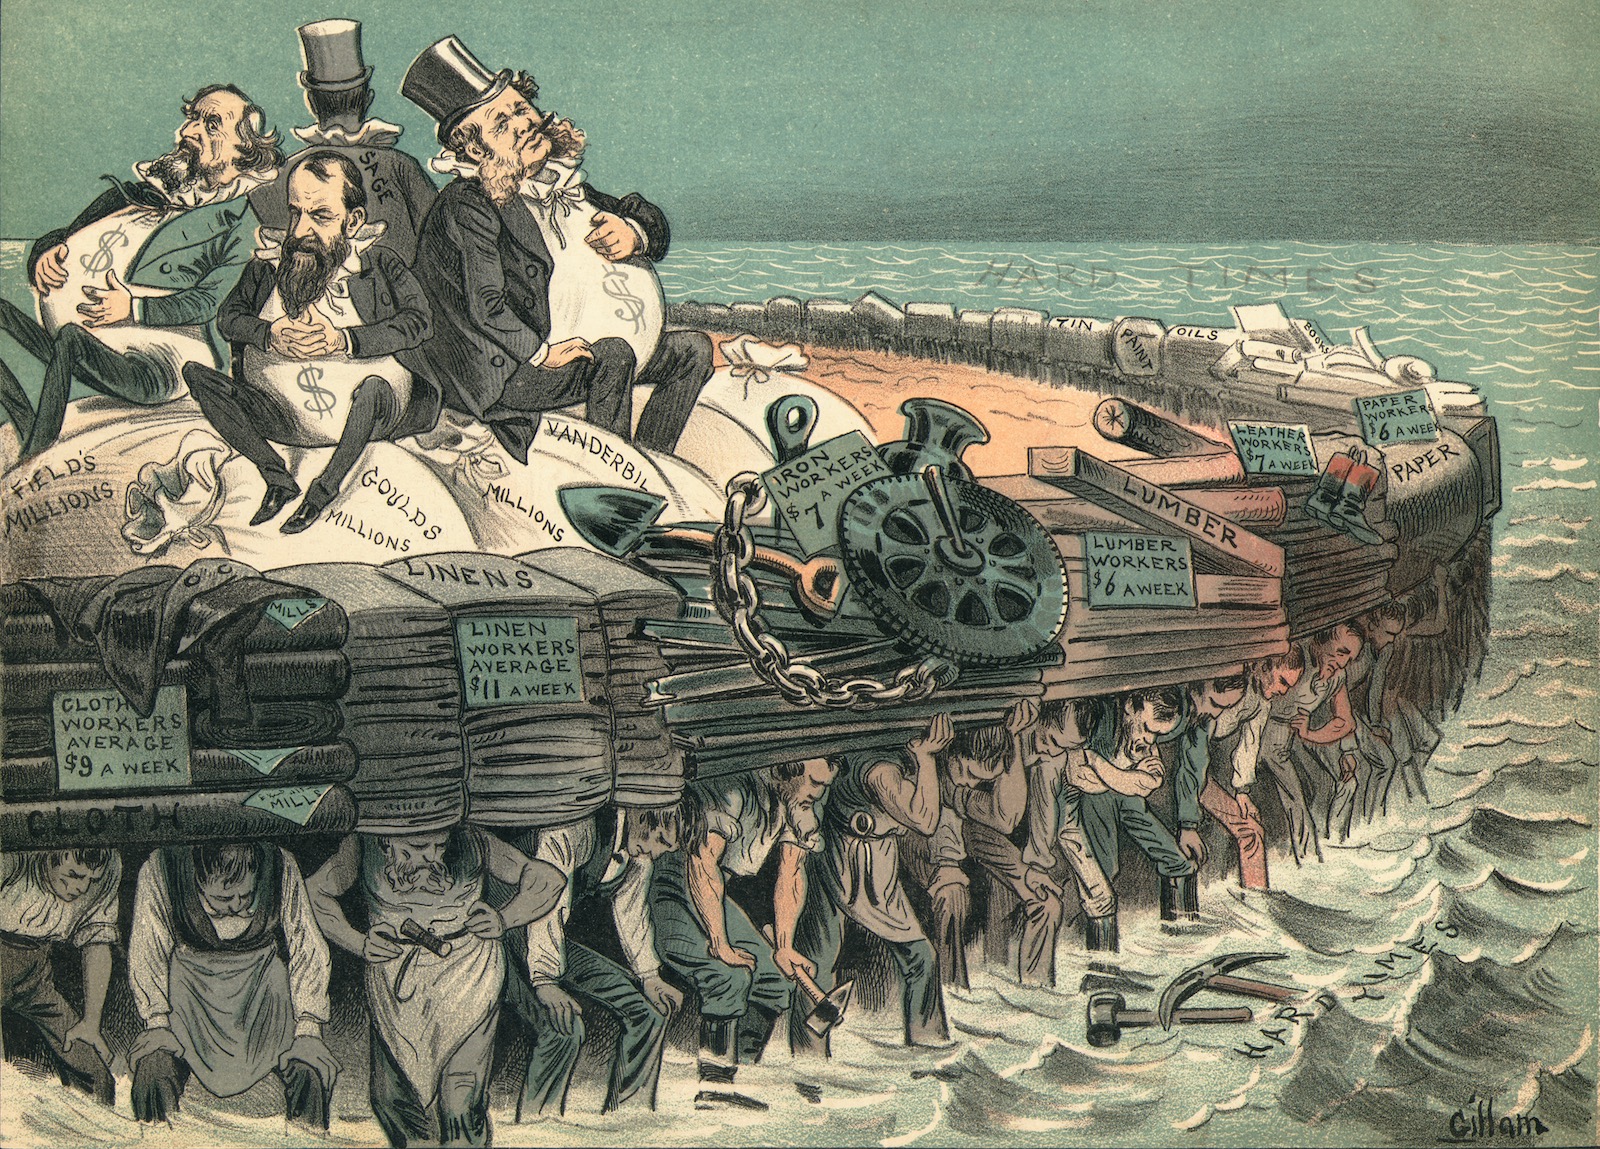 A political cartoon lampooning the “robber baron” industrialists